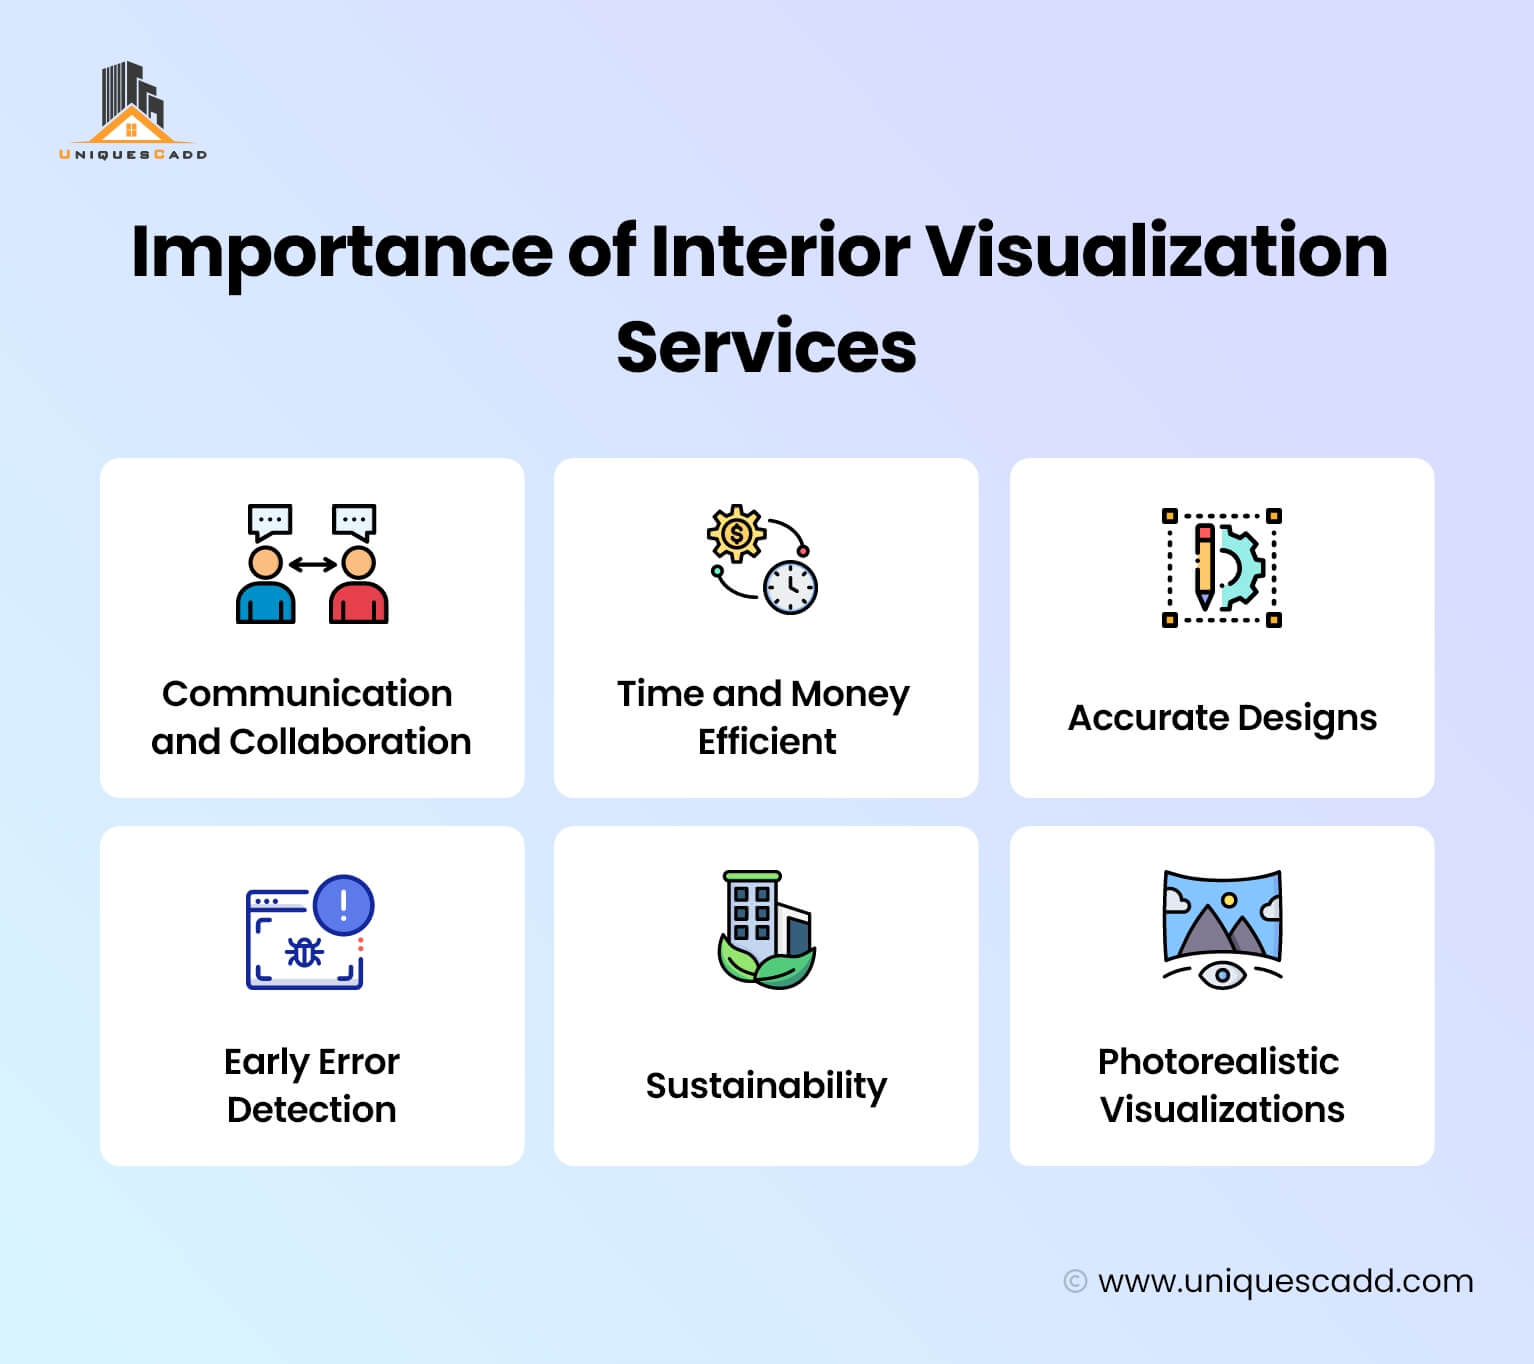 Importance of Interior Visualization Services